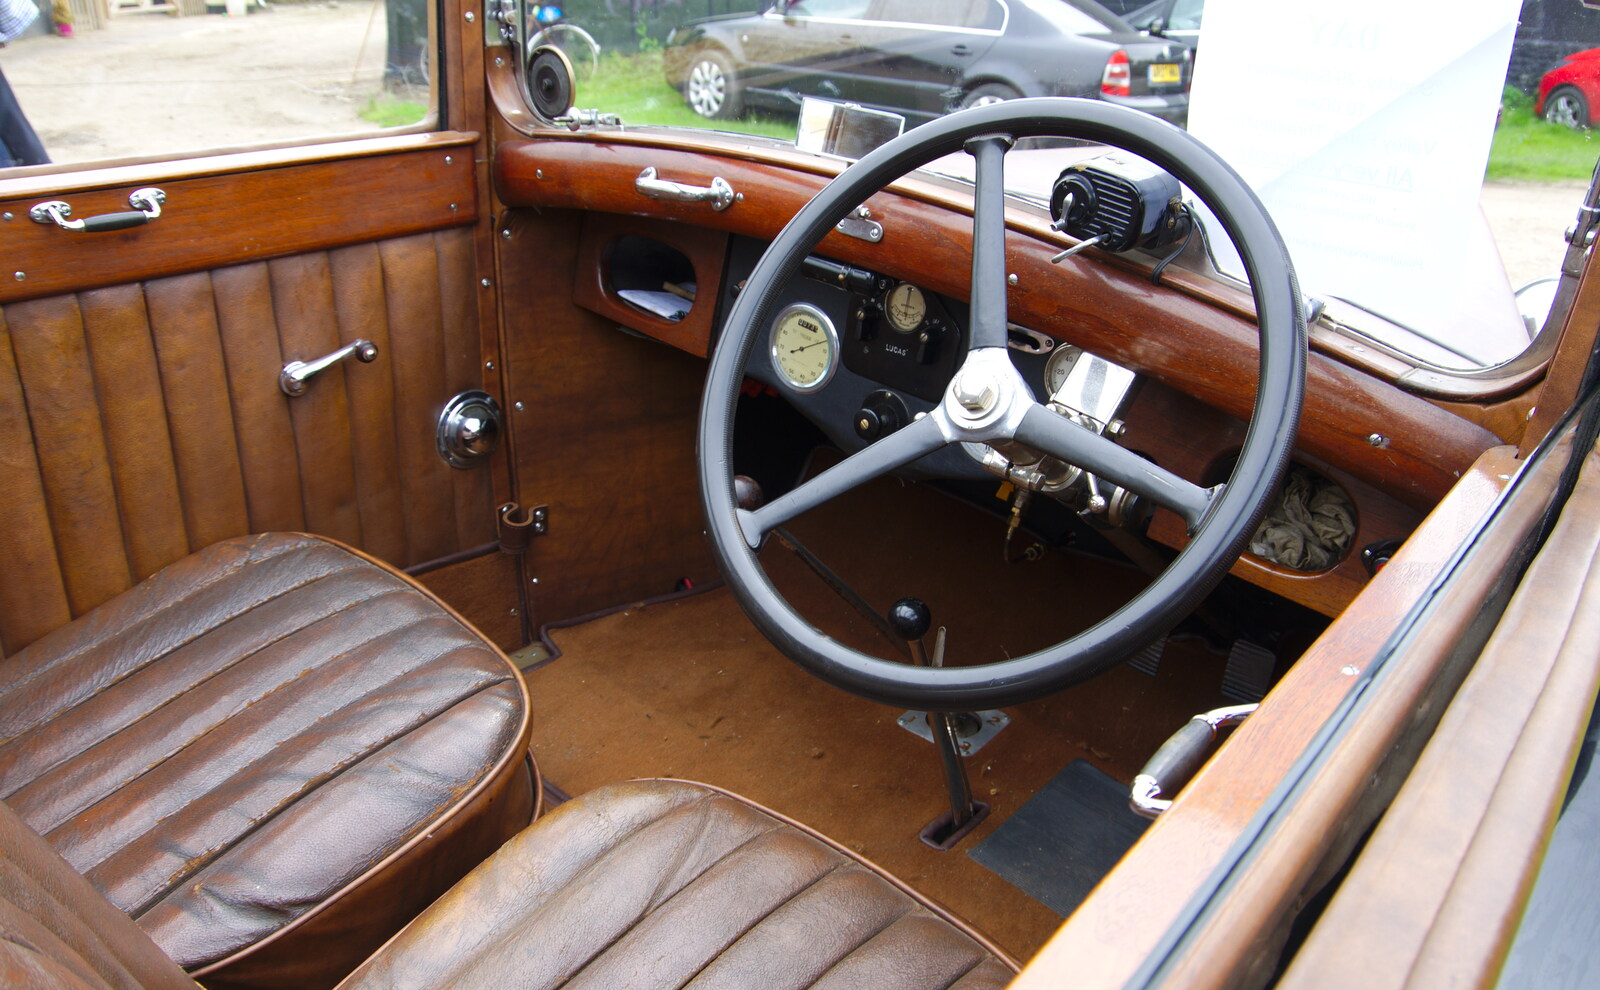 The lovely leather inside of a Rover 10 from A Hog Roast on Little Green, Thrandeston, Suffolk - 23rd June 2019